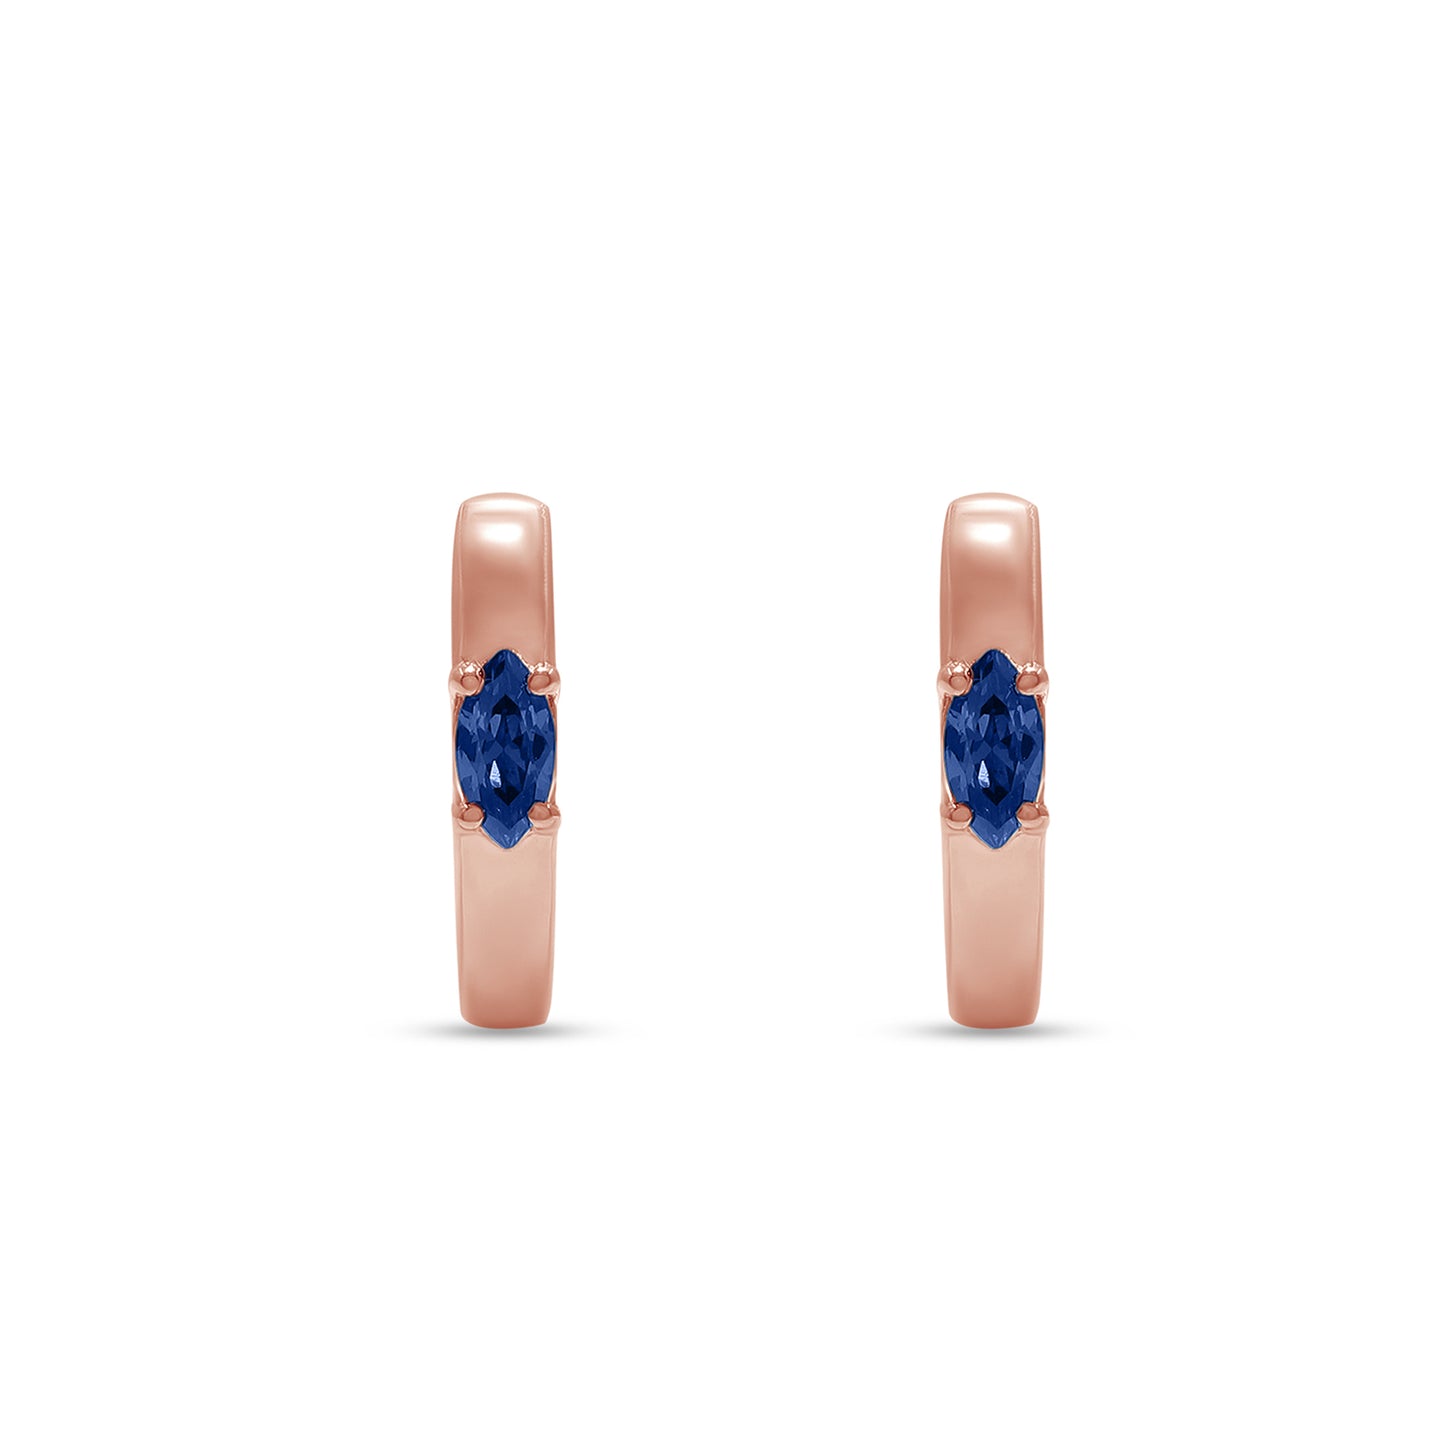 Marquise Cut Simulated Blue Sapphire Solitaire Huggie Hoop Earrings For Women In 10K Or 14K Solid Gold And 925 Sterling Silver